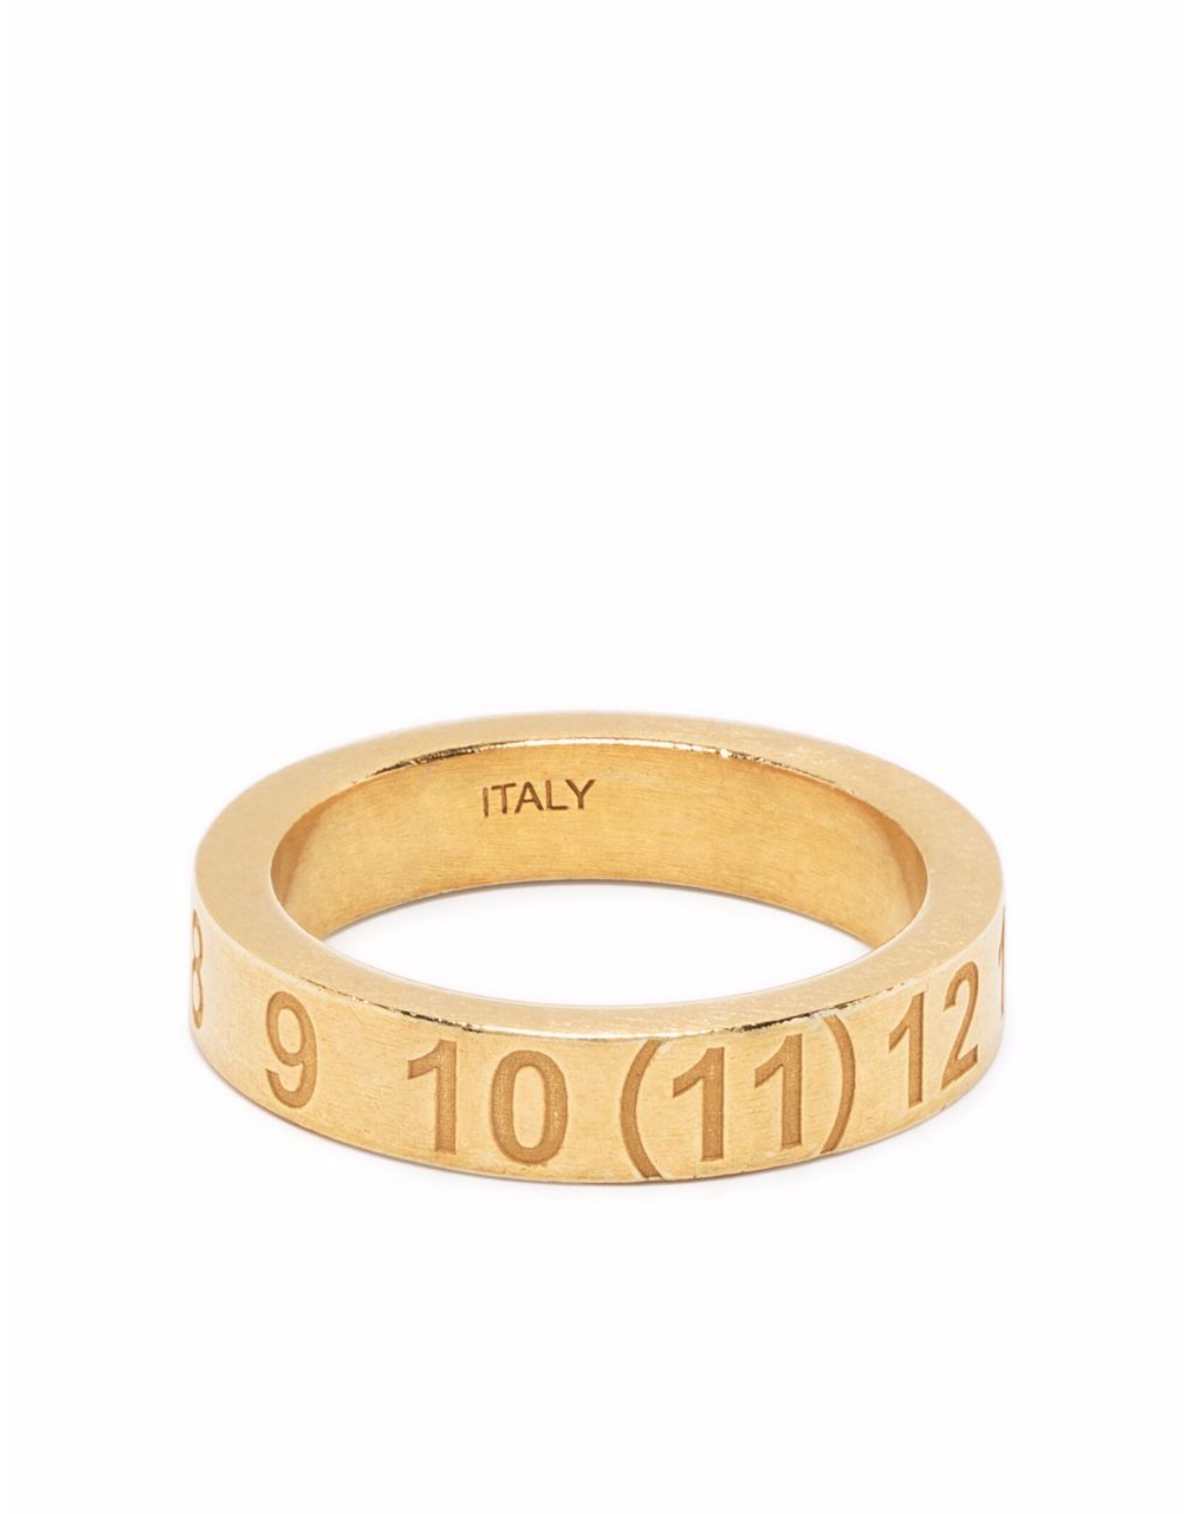 MAISON MARGIELA NUMBERS RING THICK GOLD - MEGUSTA